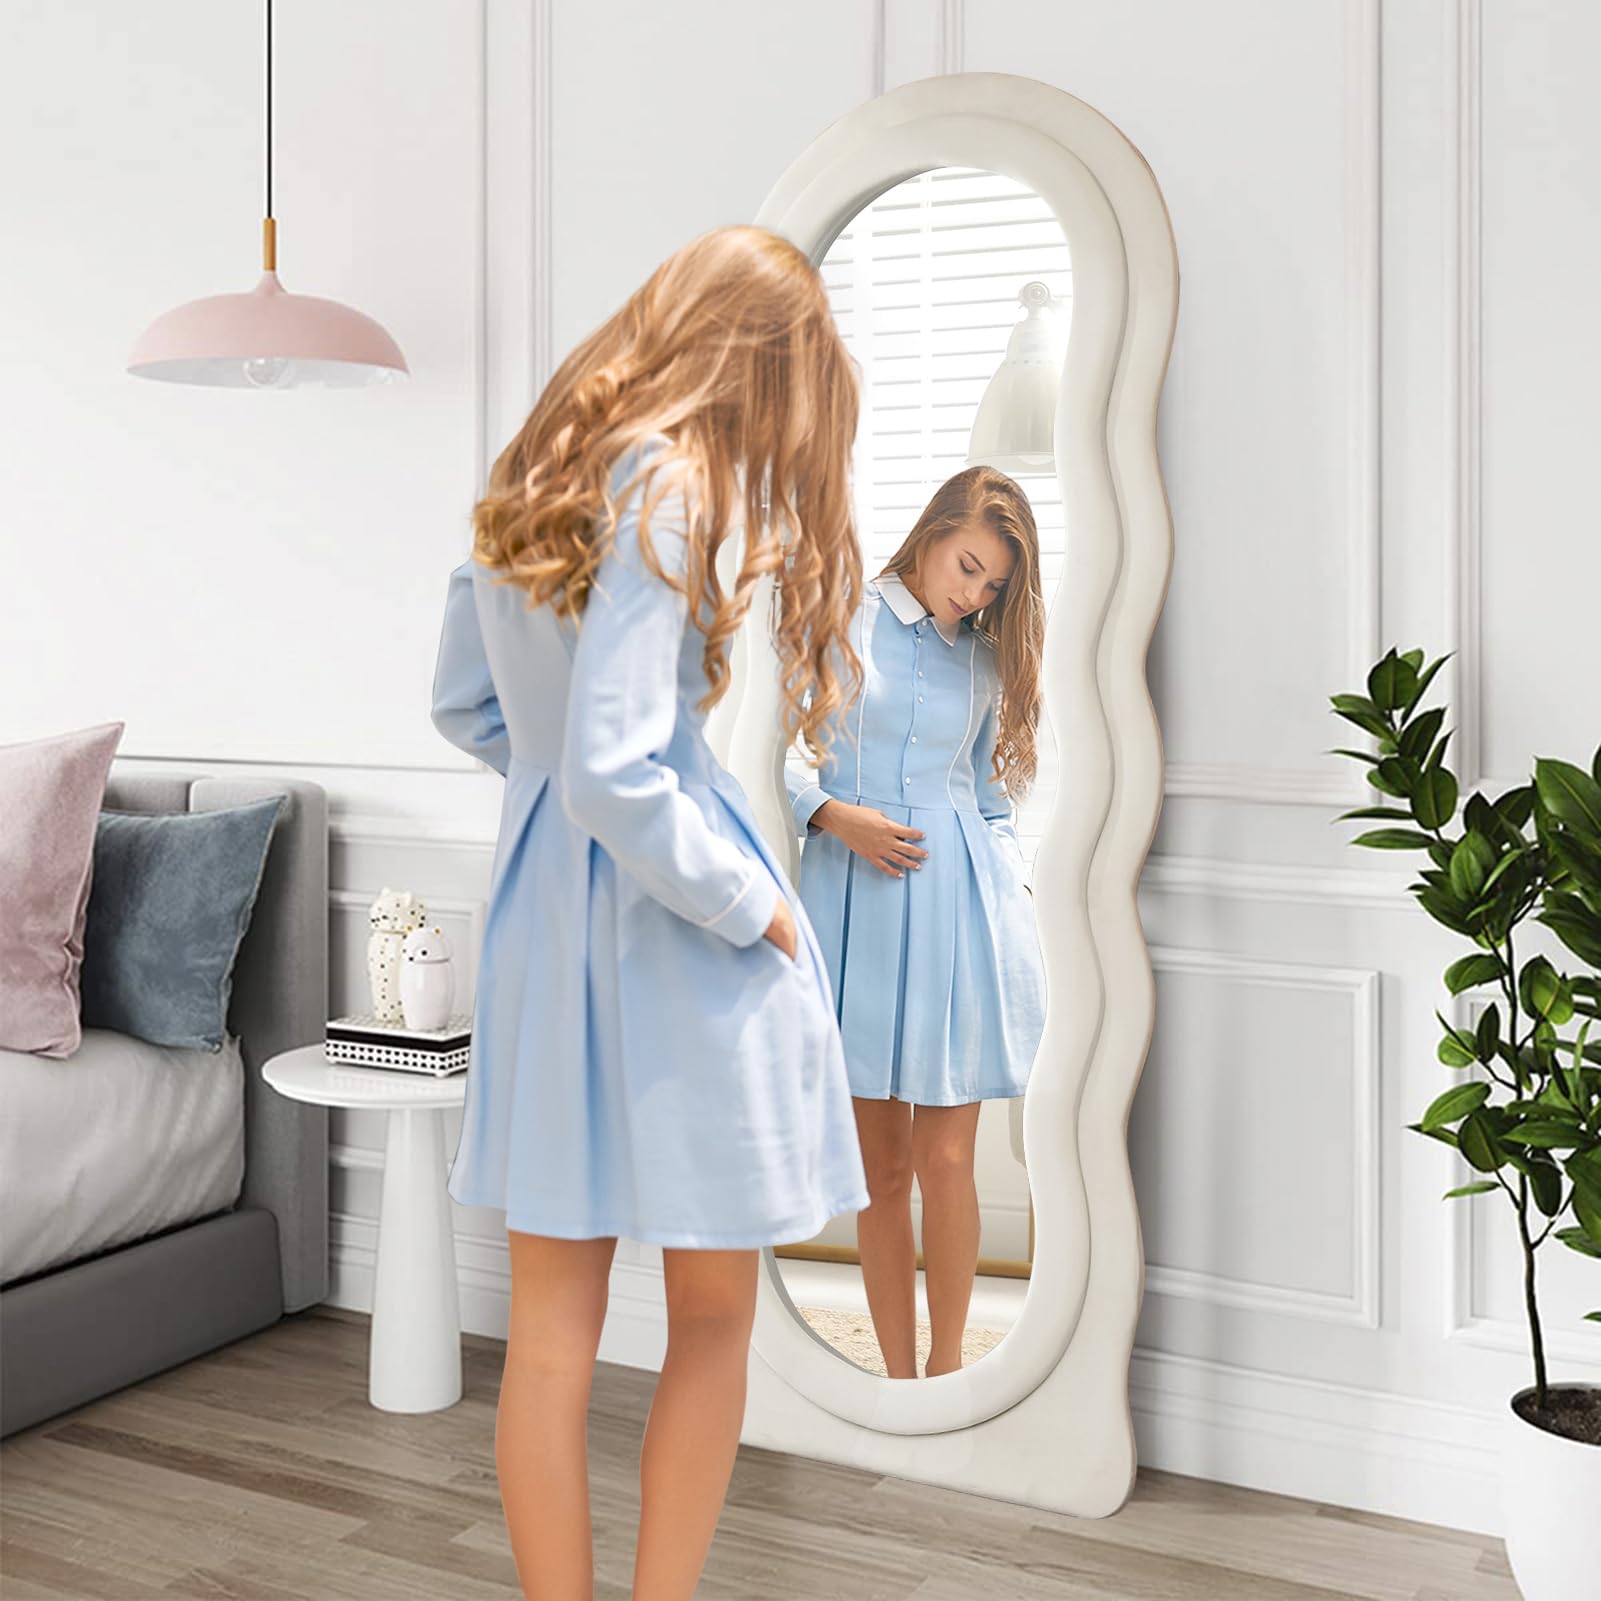 GOODONE Wavy Mirror Full Length 63"x24", Irregular Full Body Mirror, Wave Arched Floor Mirror, Wall Mirror Standing Hanging or Leaning Against Wall for Bedroom, Flannel Wrapped Wooden Frame,Beige